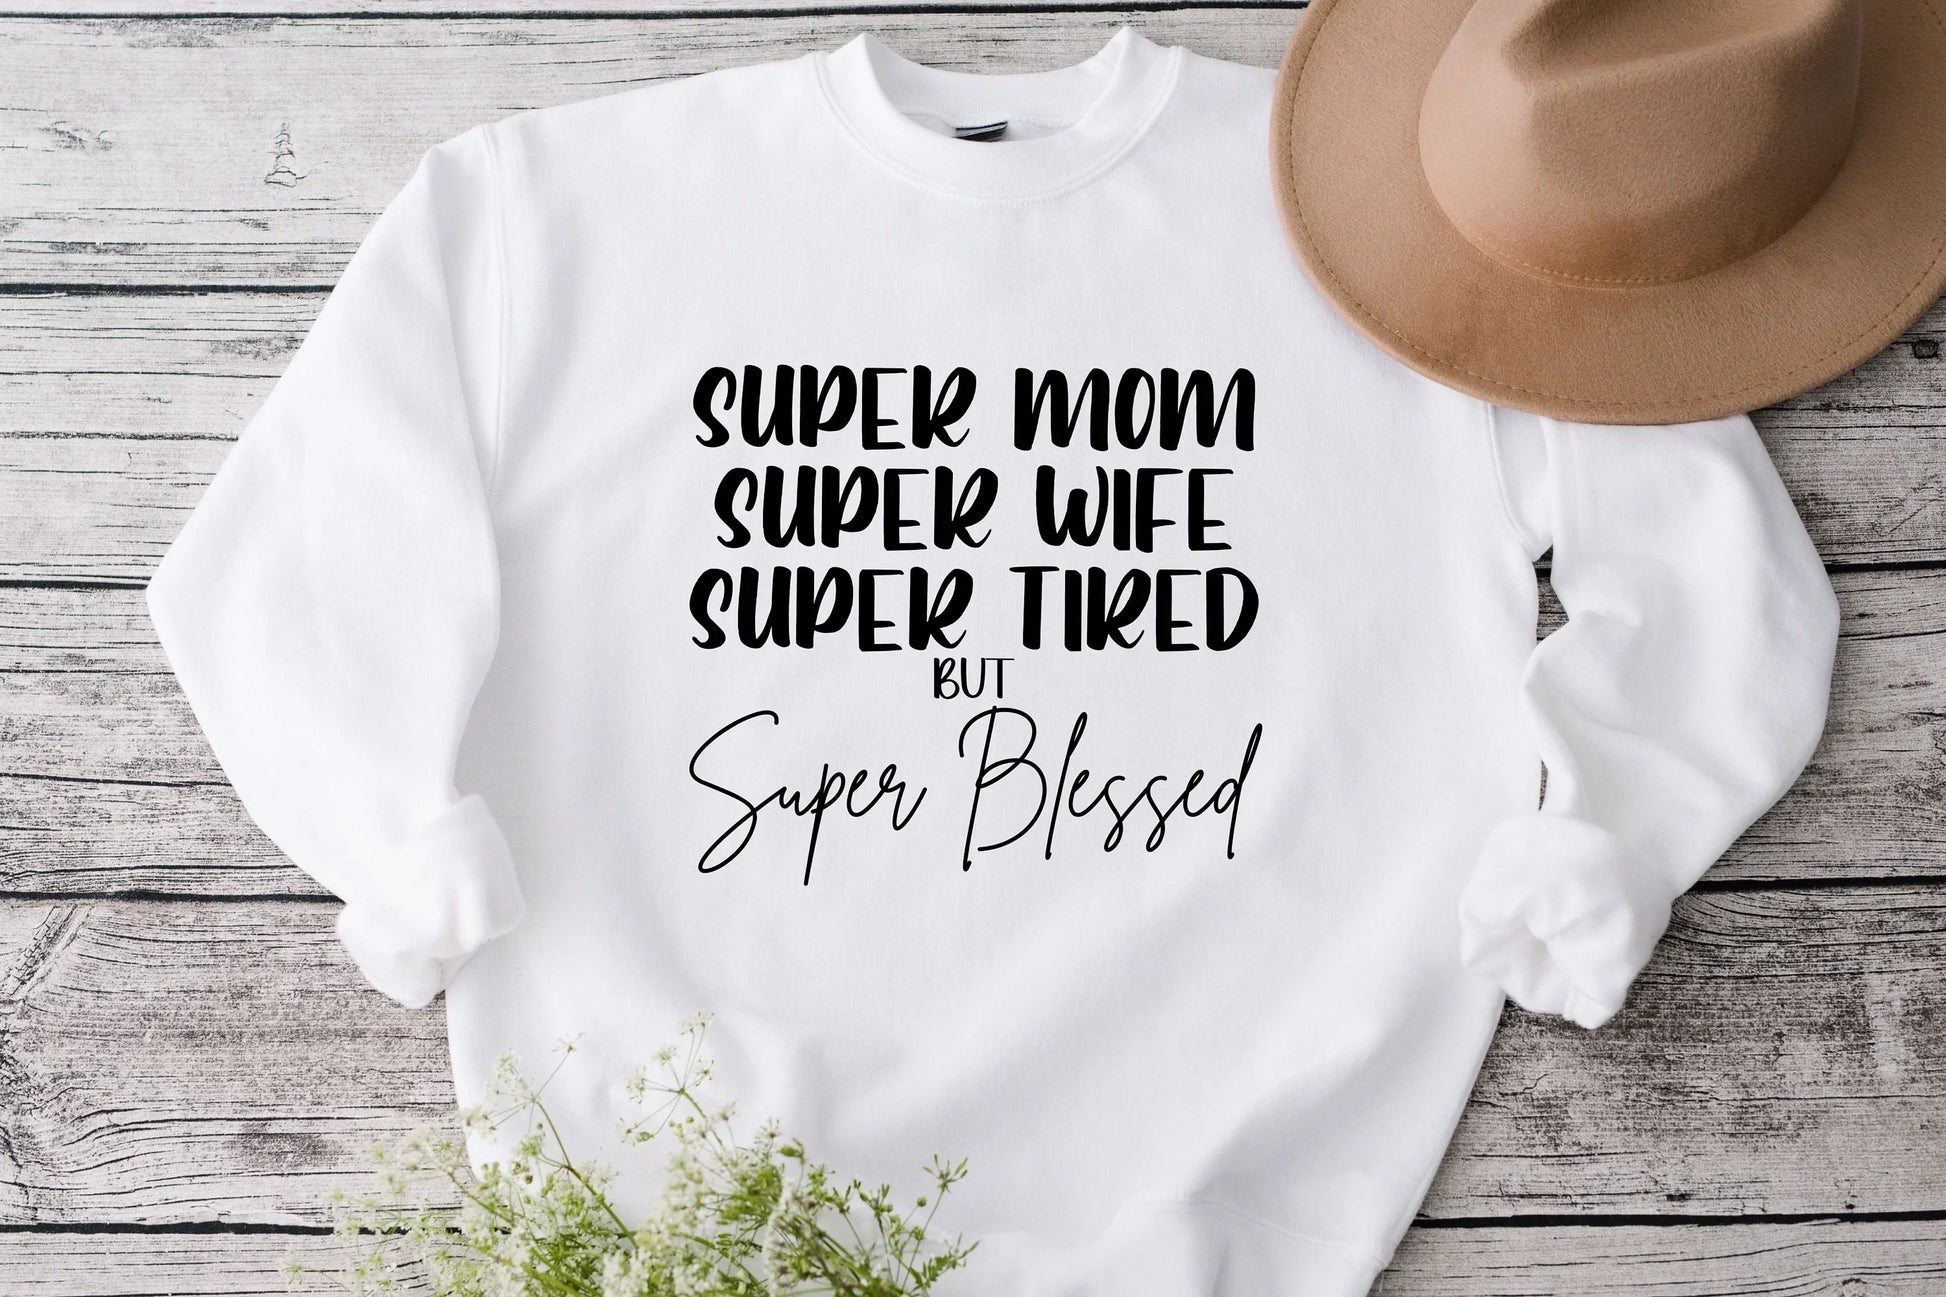 Mom Shirt, Christian hoodie, Grateful shirt, Thankful tshirt, Thankful mom Sweatshirt, Super Mom, Super Wife, Super Tired, Super Blessed